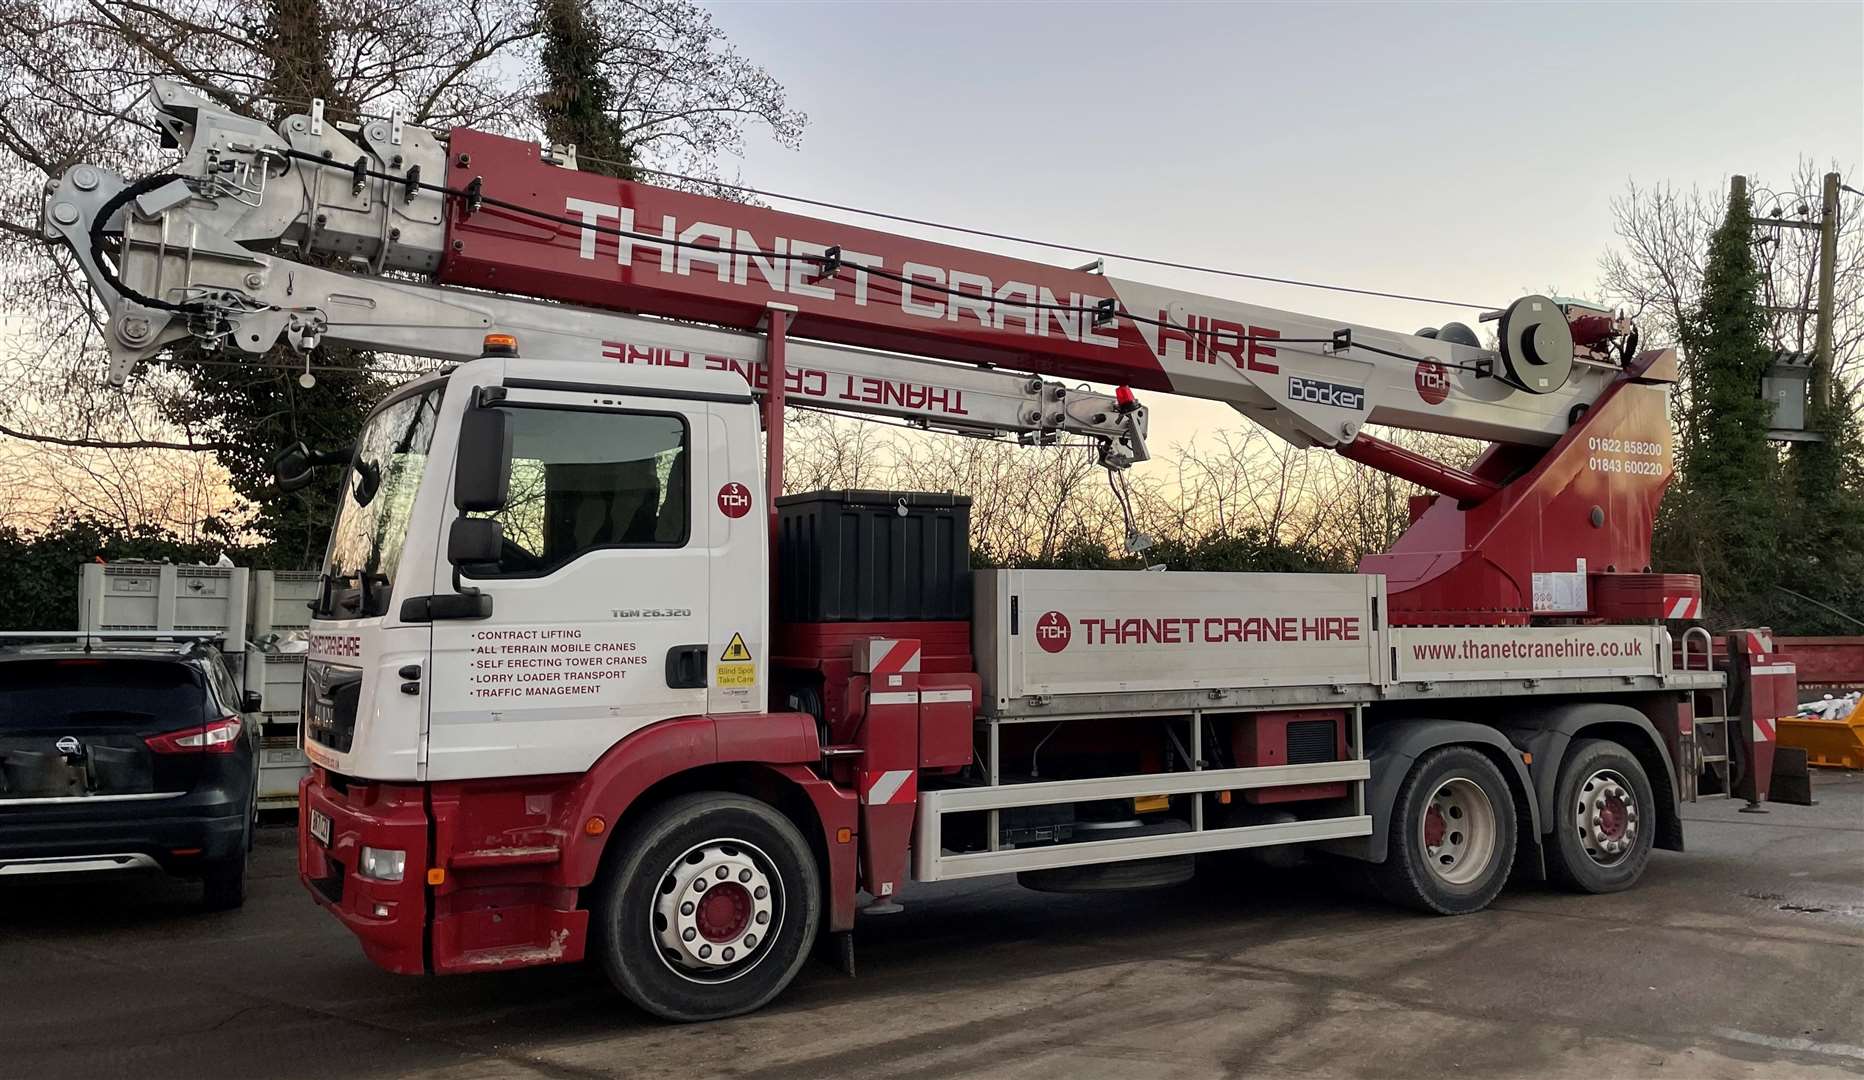 Thanet Crane Hire is adding to its fleet